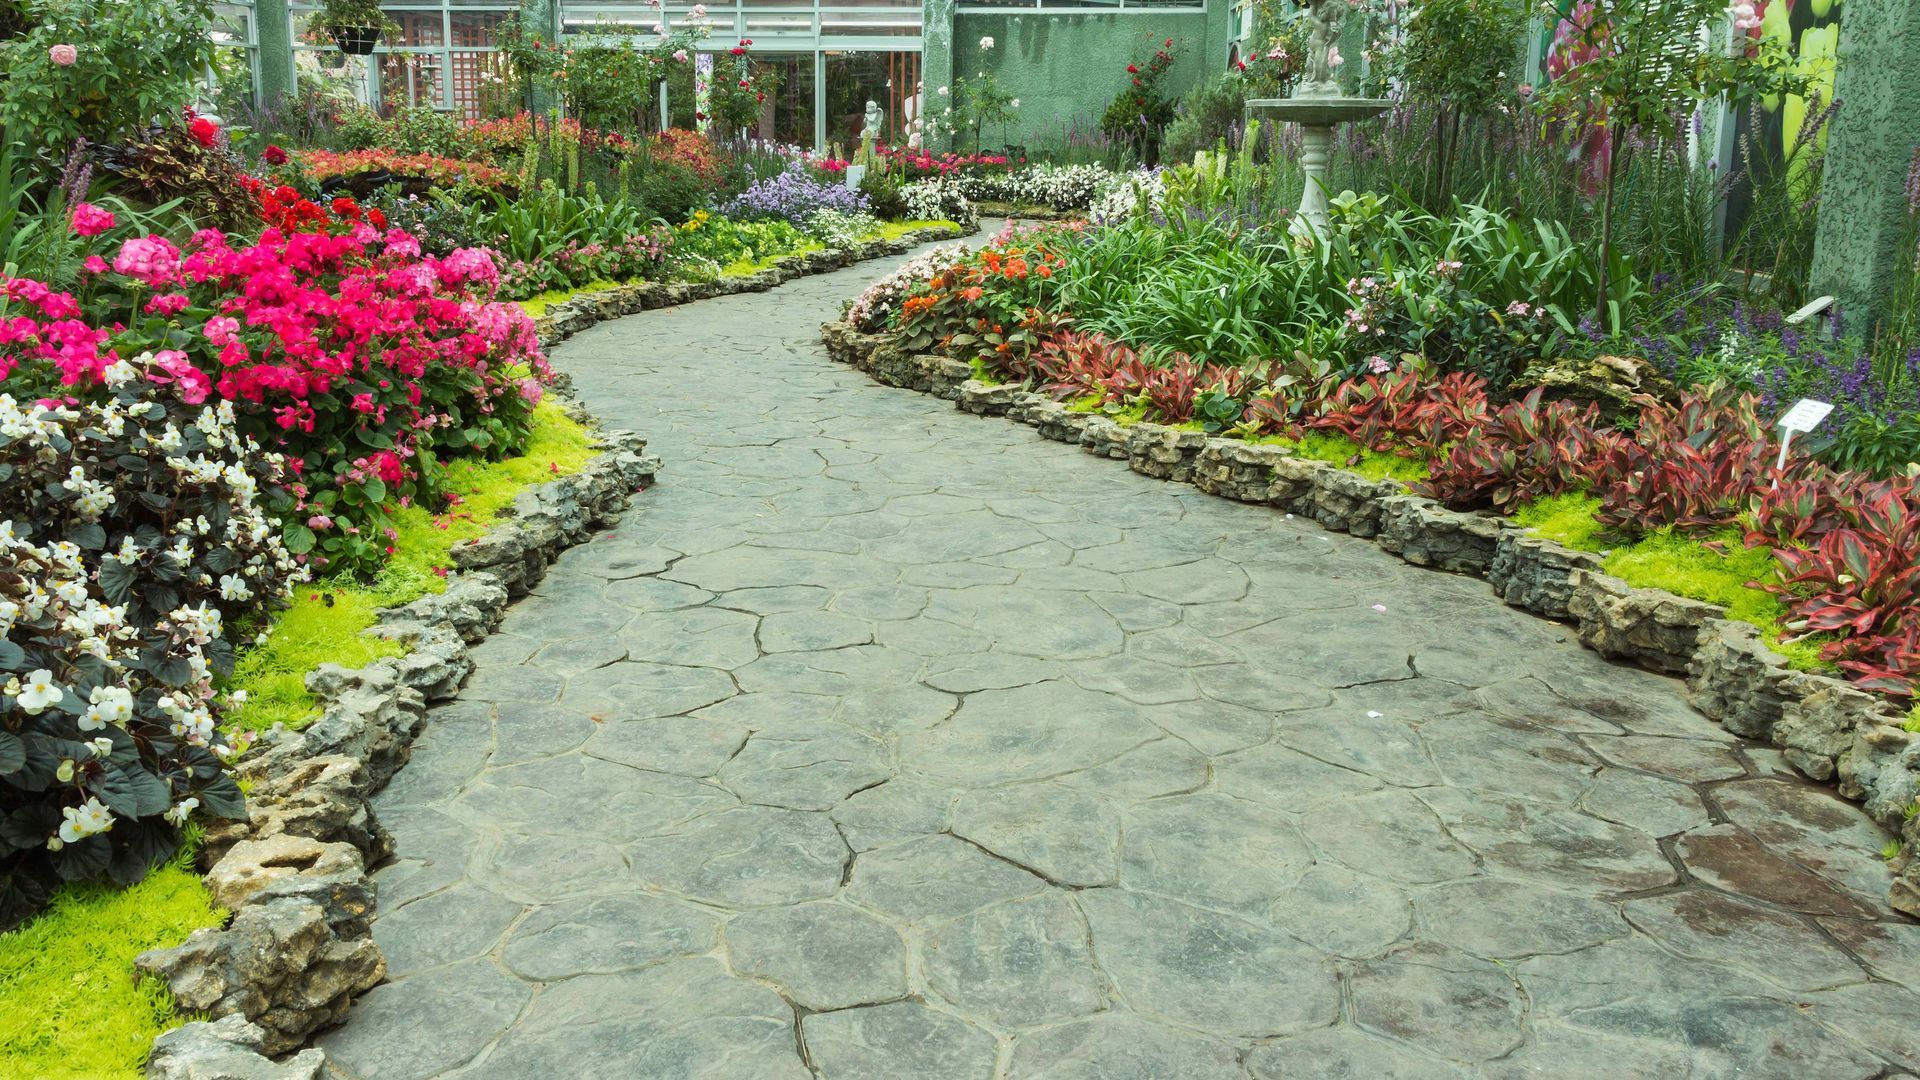 Walkway Surrounded by Flowers Everywhere